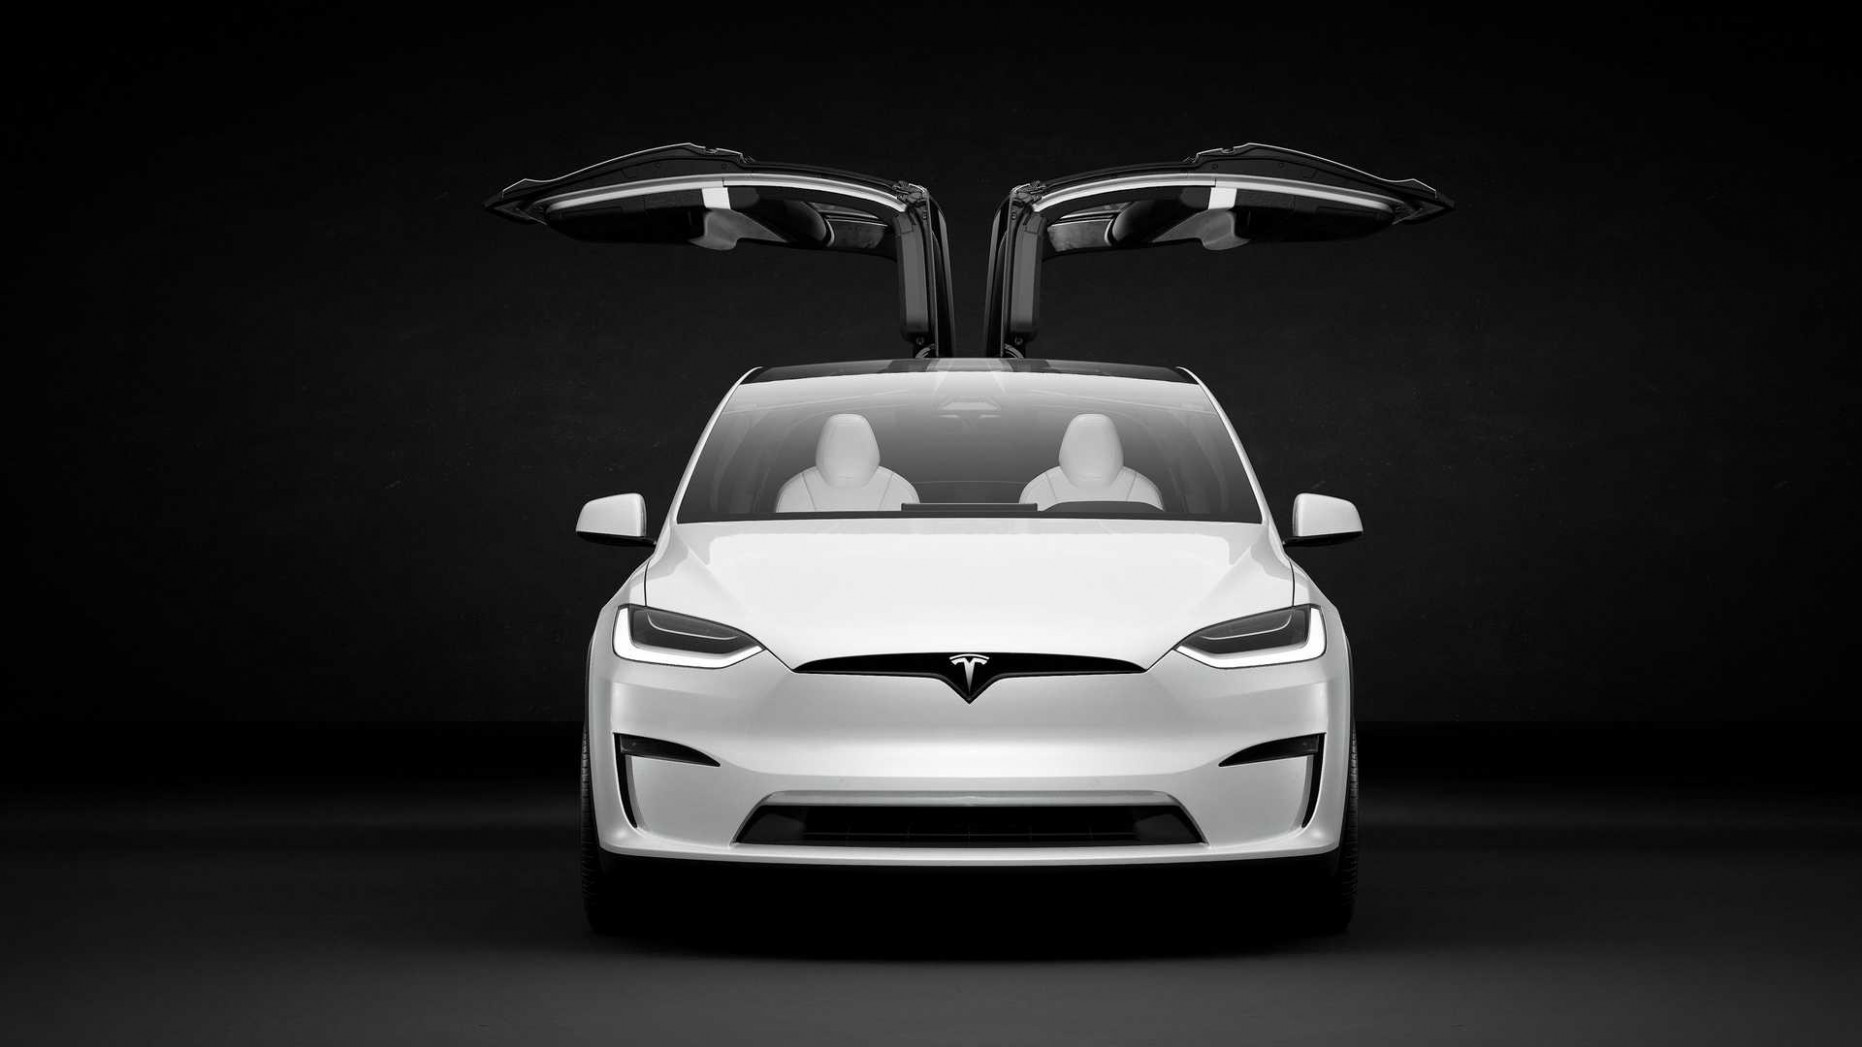 No Word On Tesla Model X Plaid At Event? Think Again, It Was There - tesla model x plaid